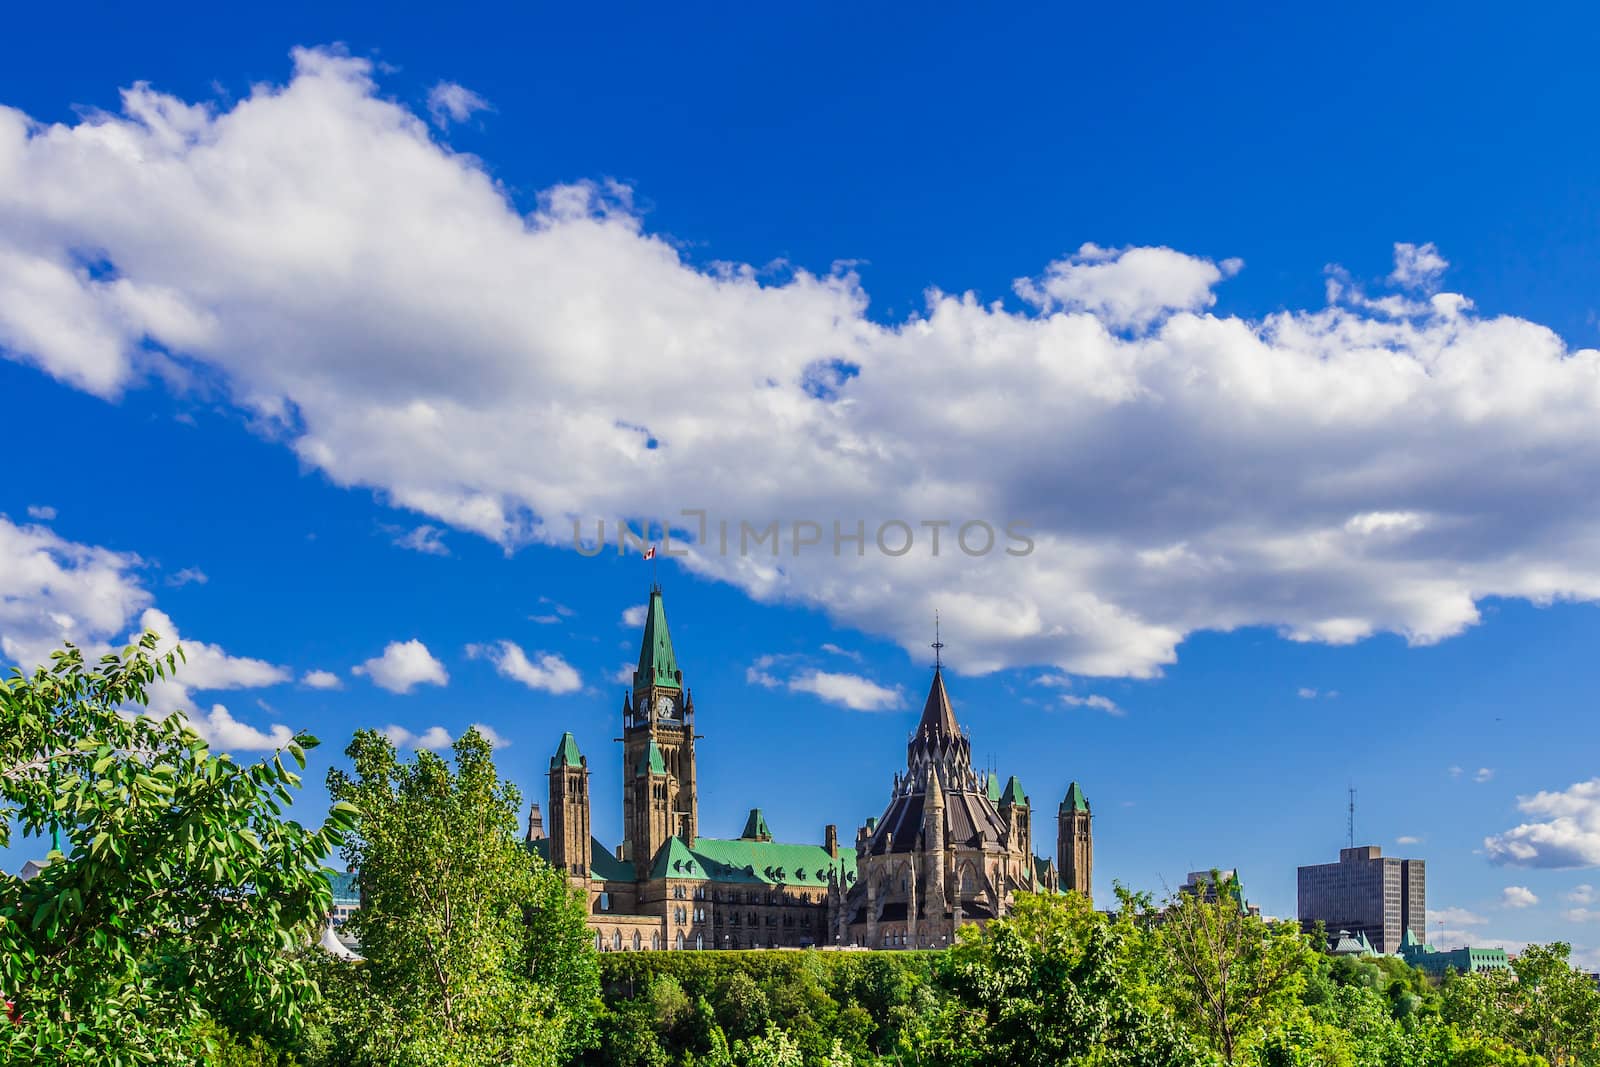 Parliament building in Ottawa by petkolophoto